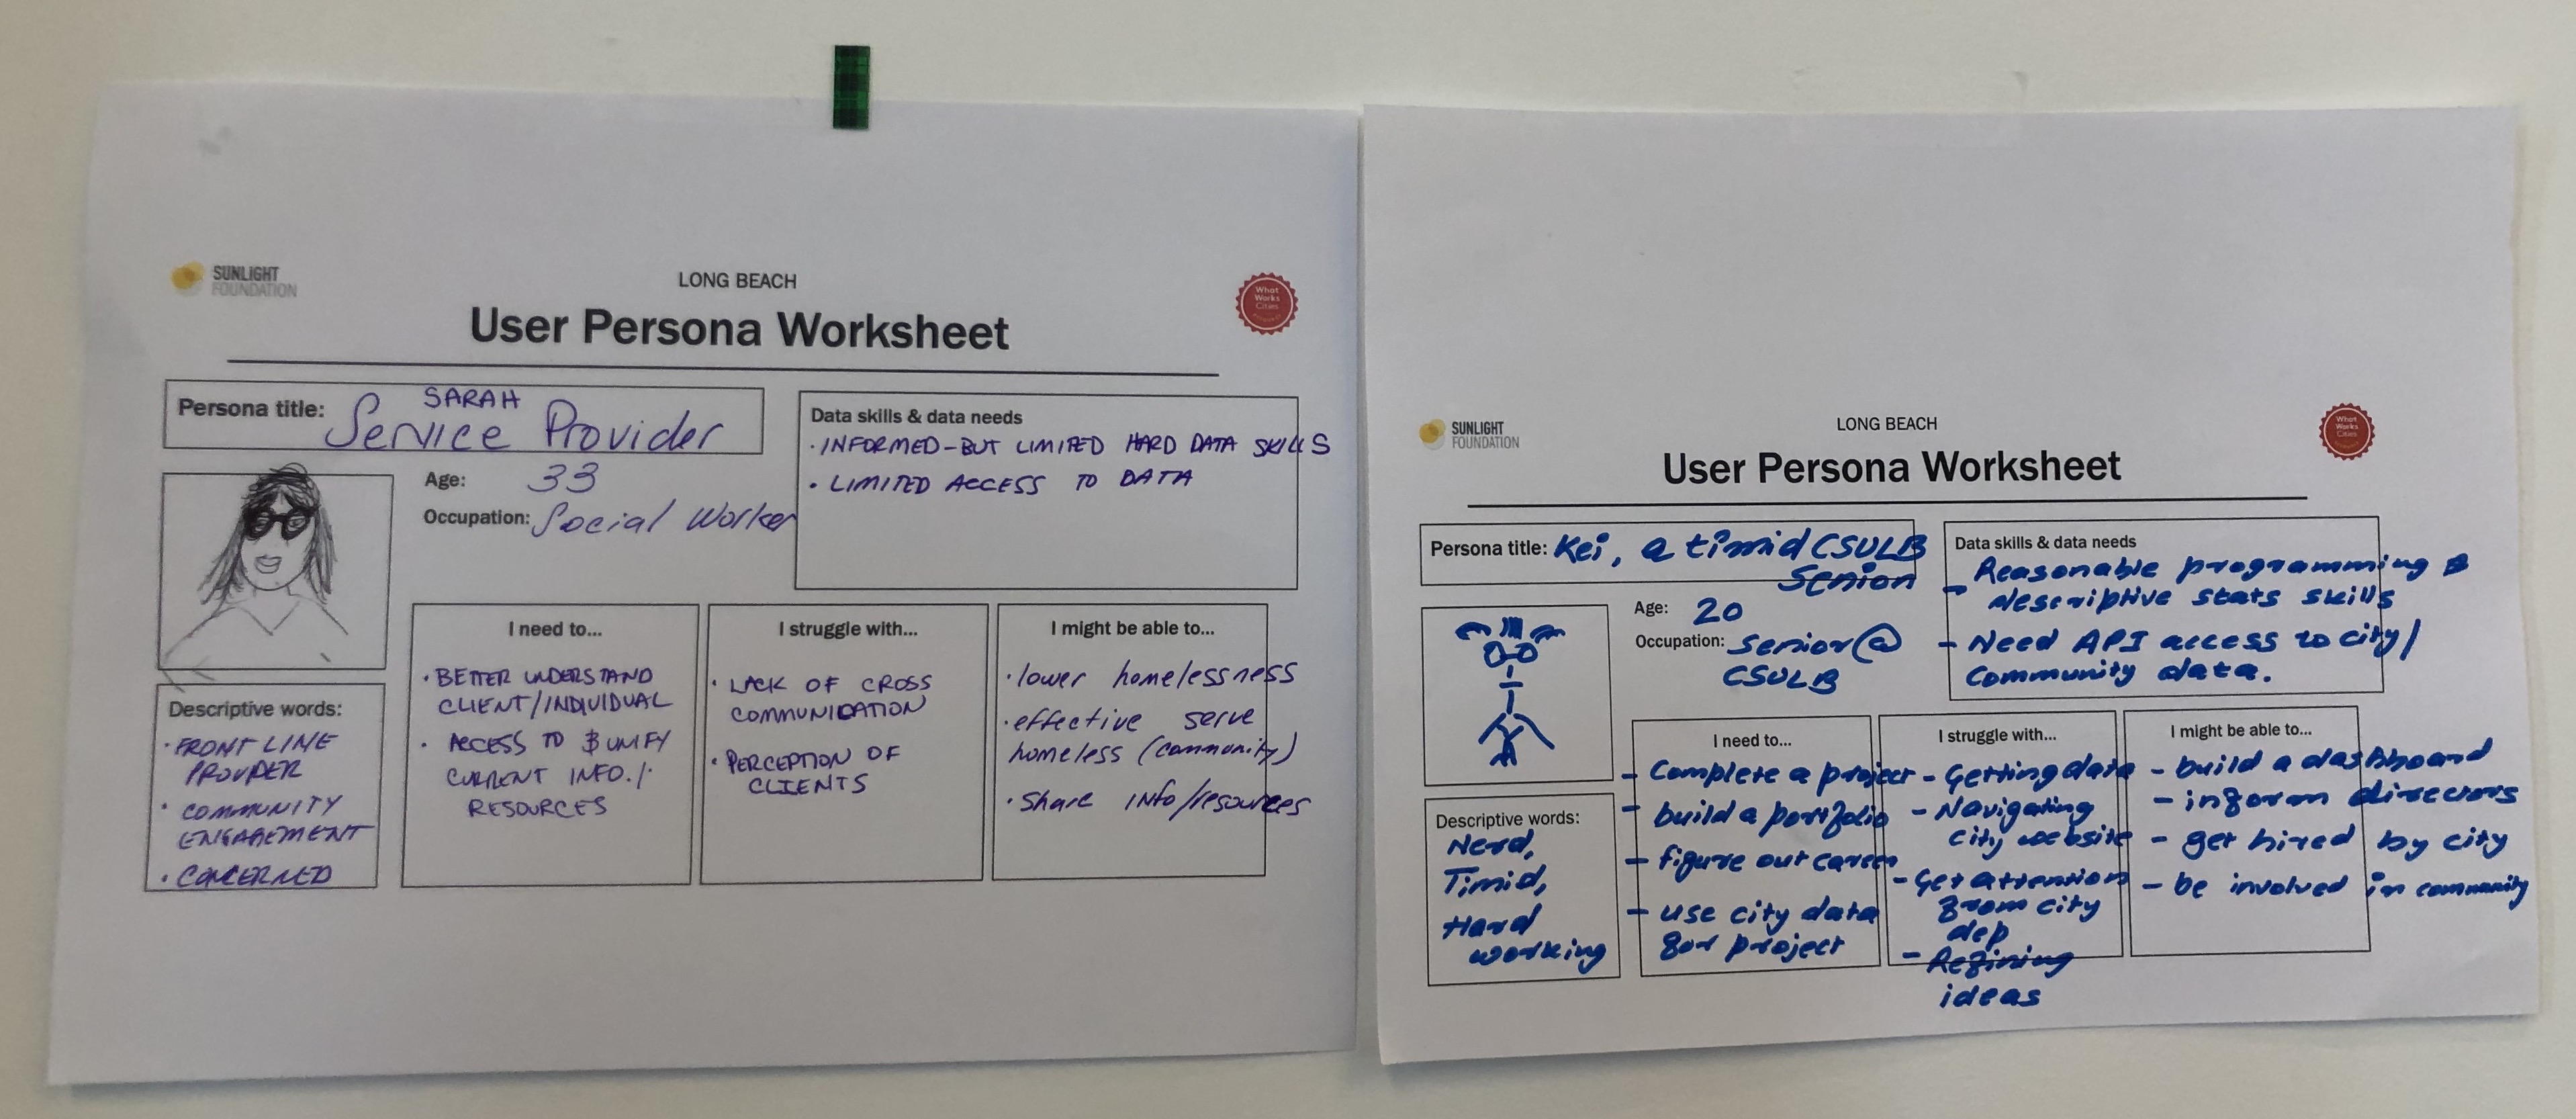 Completed user-persona worksheets